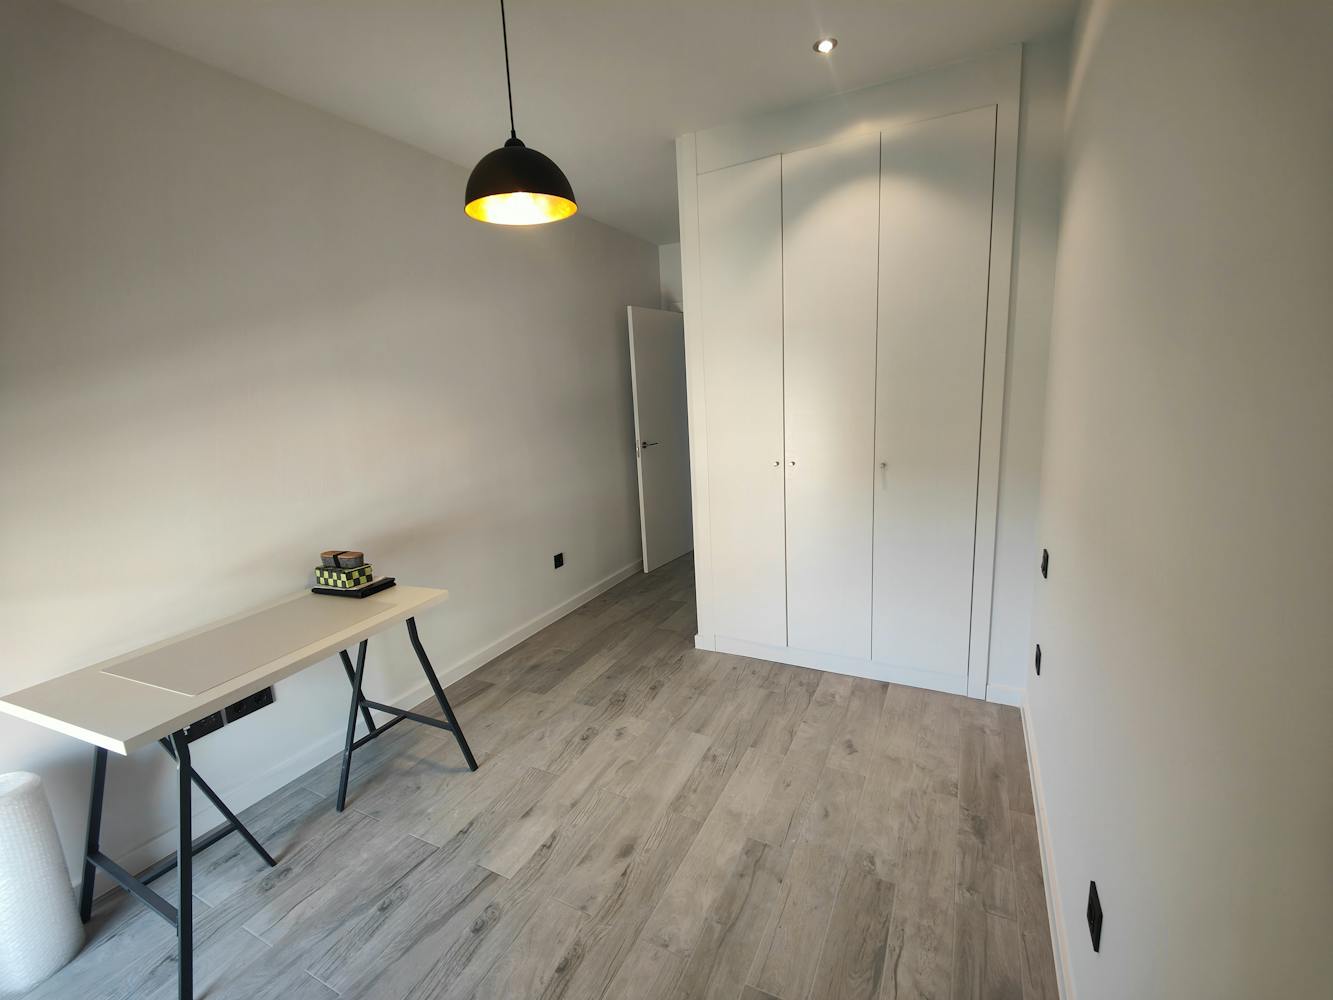 Photo of the room in a flat for rent